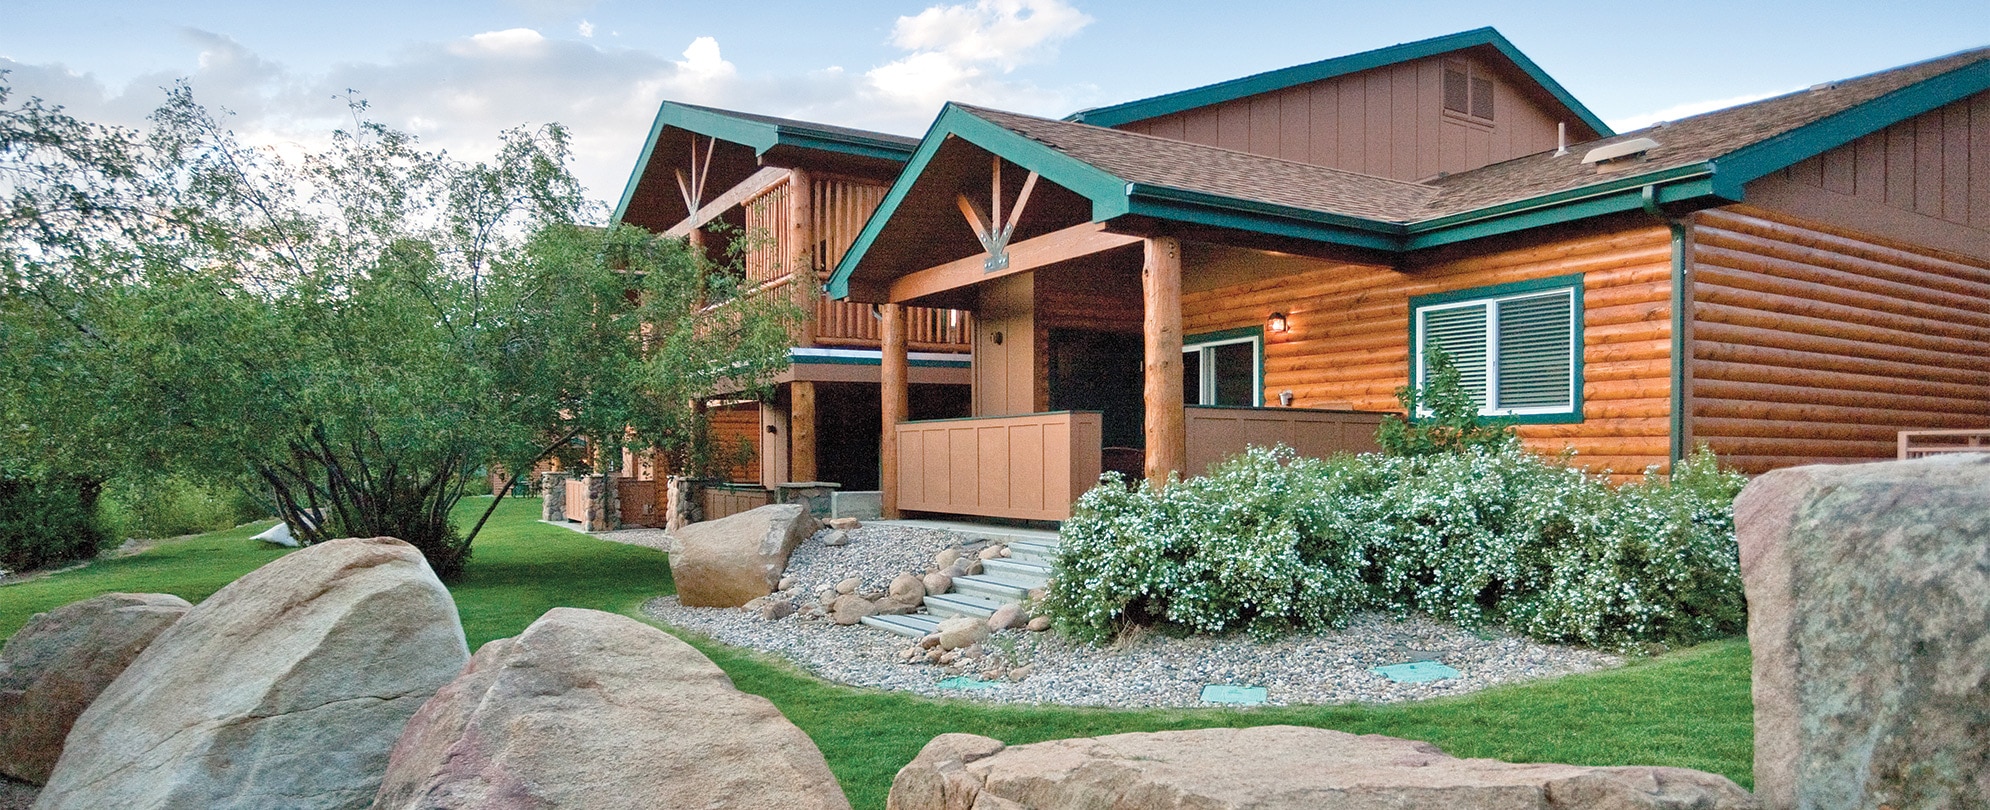 The exterior of WorldMark Estes Park, a cabin-style timeshare resort in Colorado.